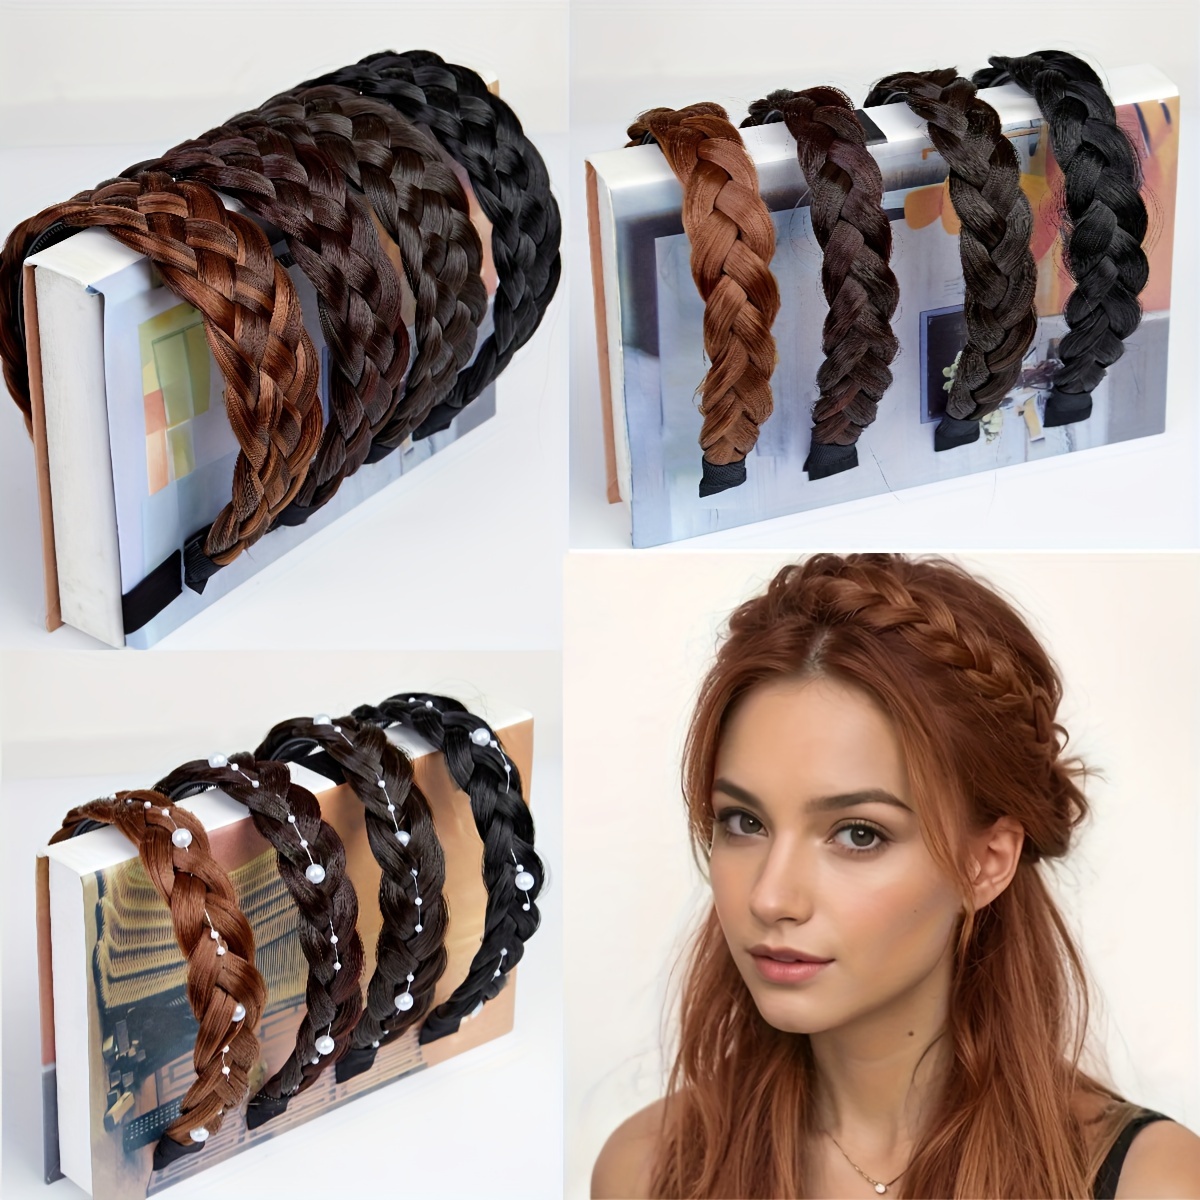  Hairro Braided Headband With Teeth Fishtail Braids Hairband  With Tooth Synthetic Fish Tail Hair Band Plaited Hairband Hair Hoop Braid  Headband Extensions Headband Hairpiece For Women 48g #silver gray 